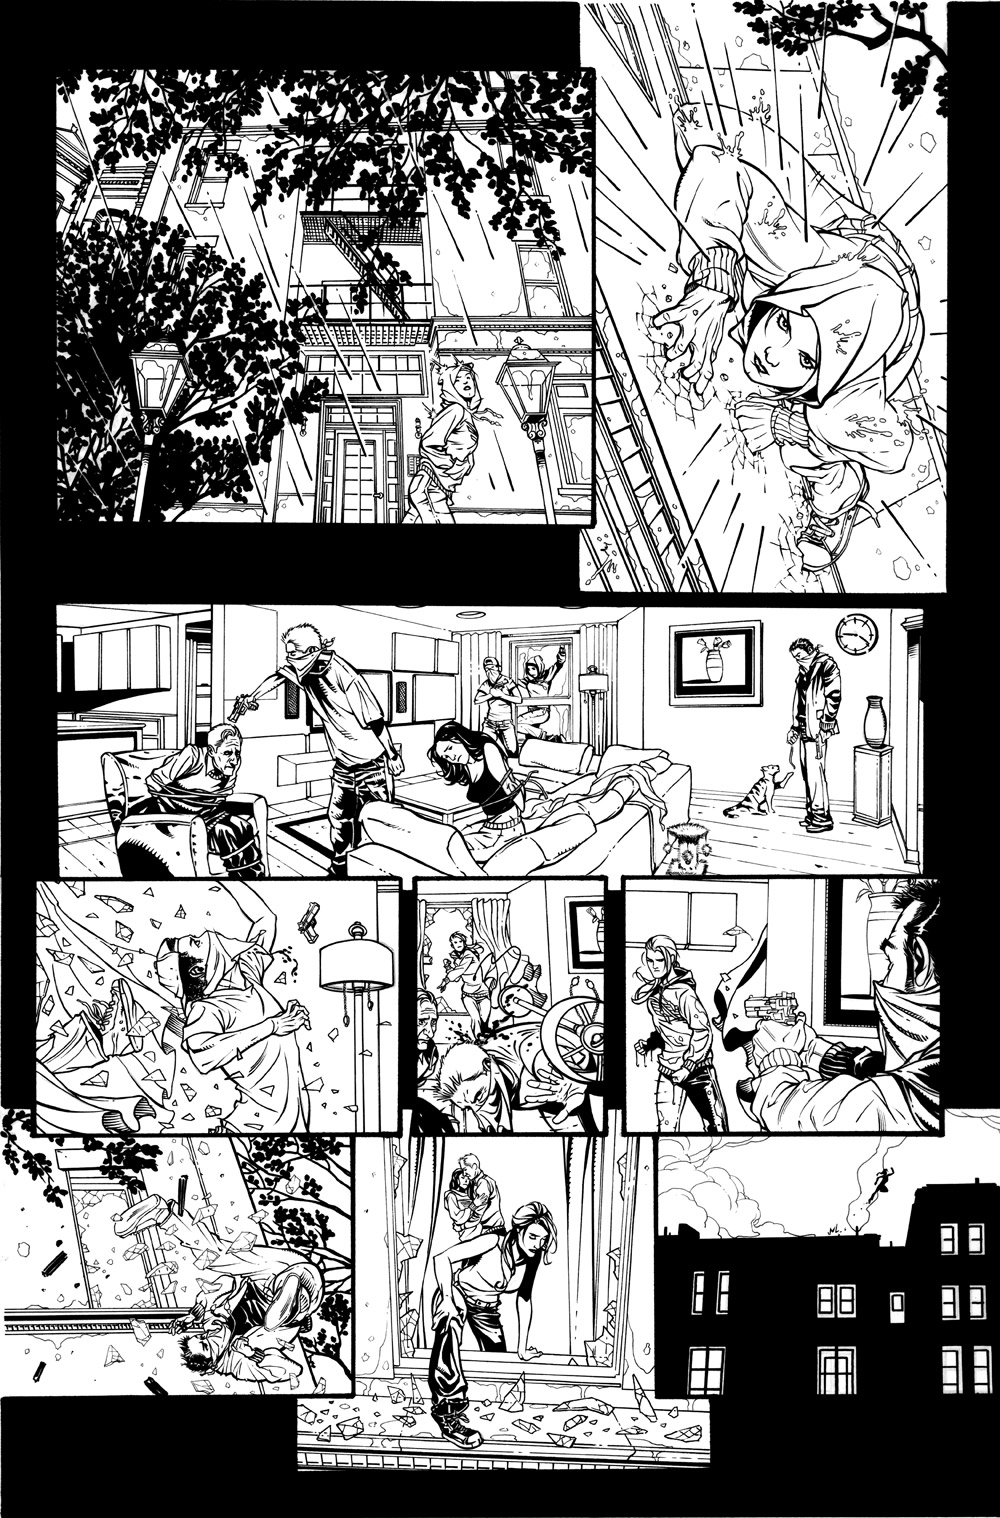 The-Shield-1-Pg-15-Finished-Inks-Templated